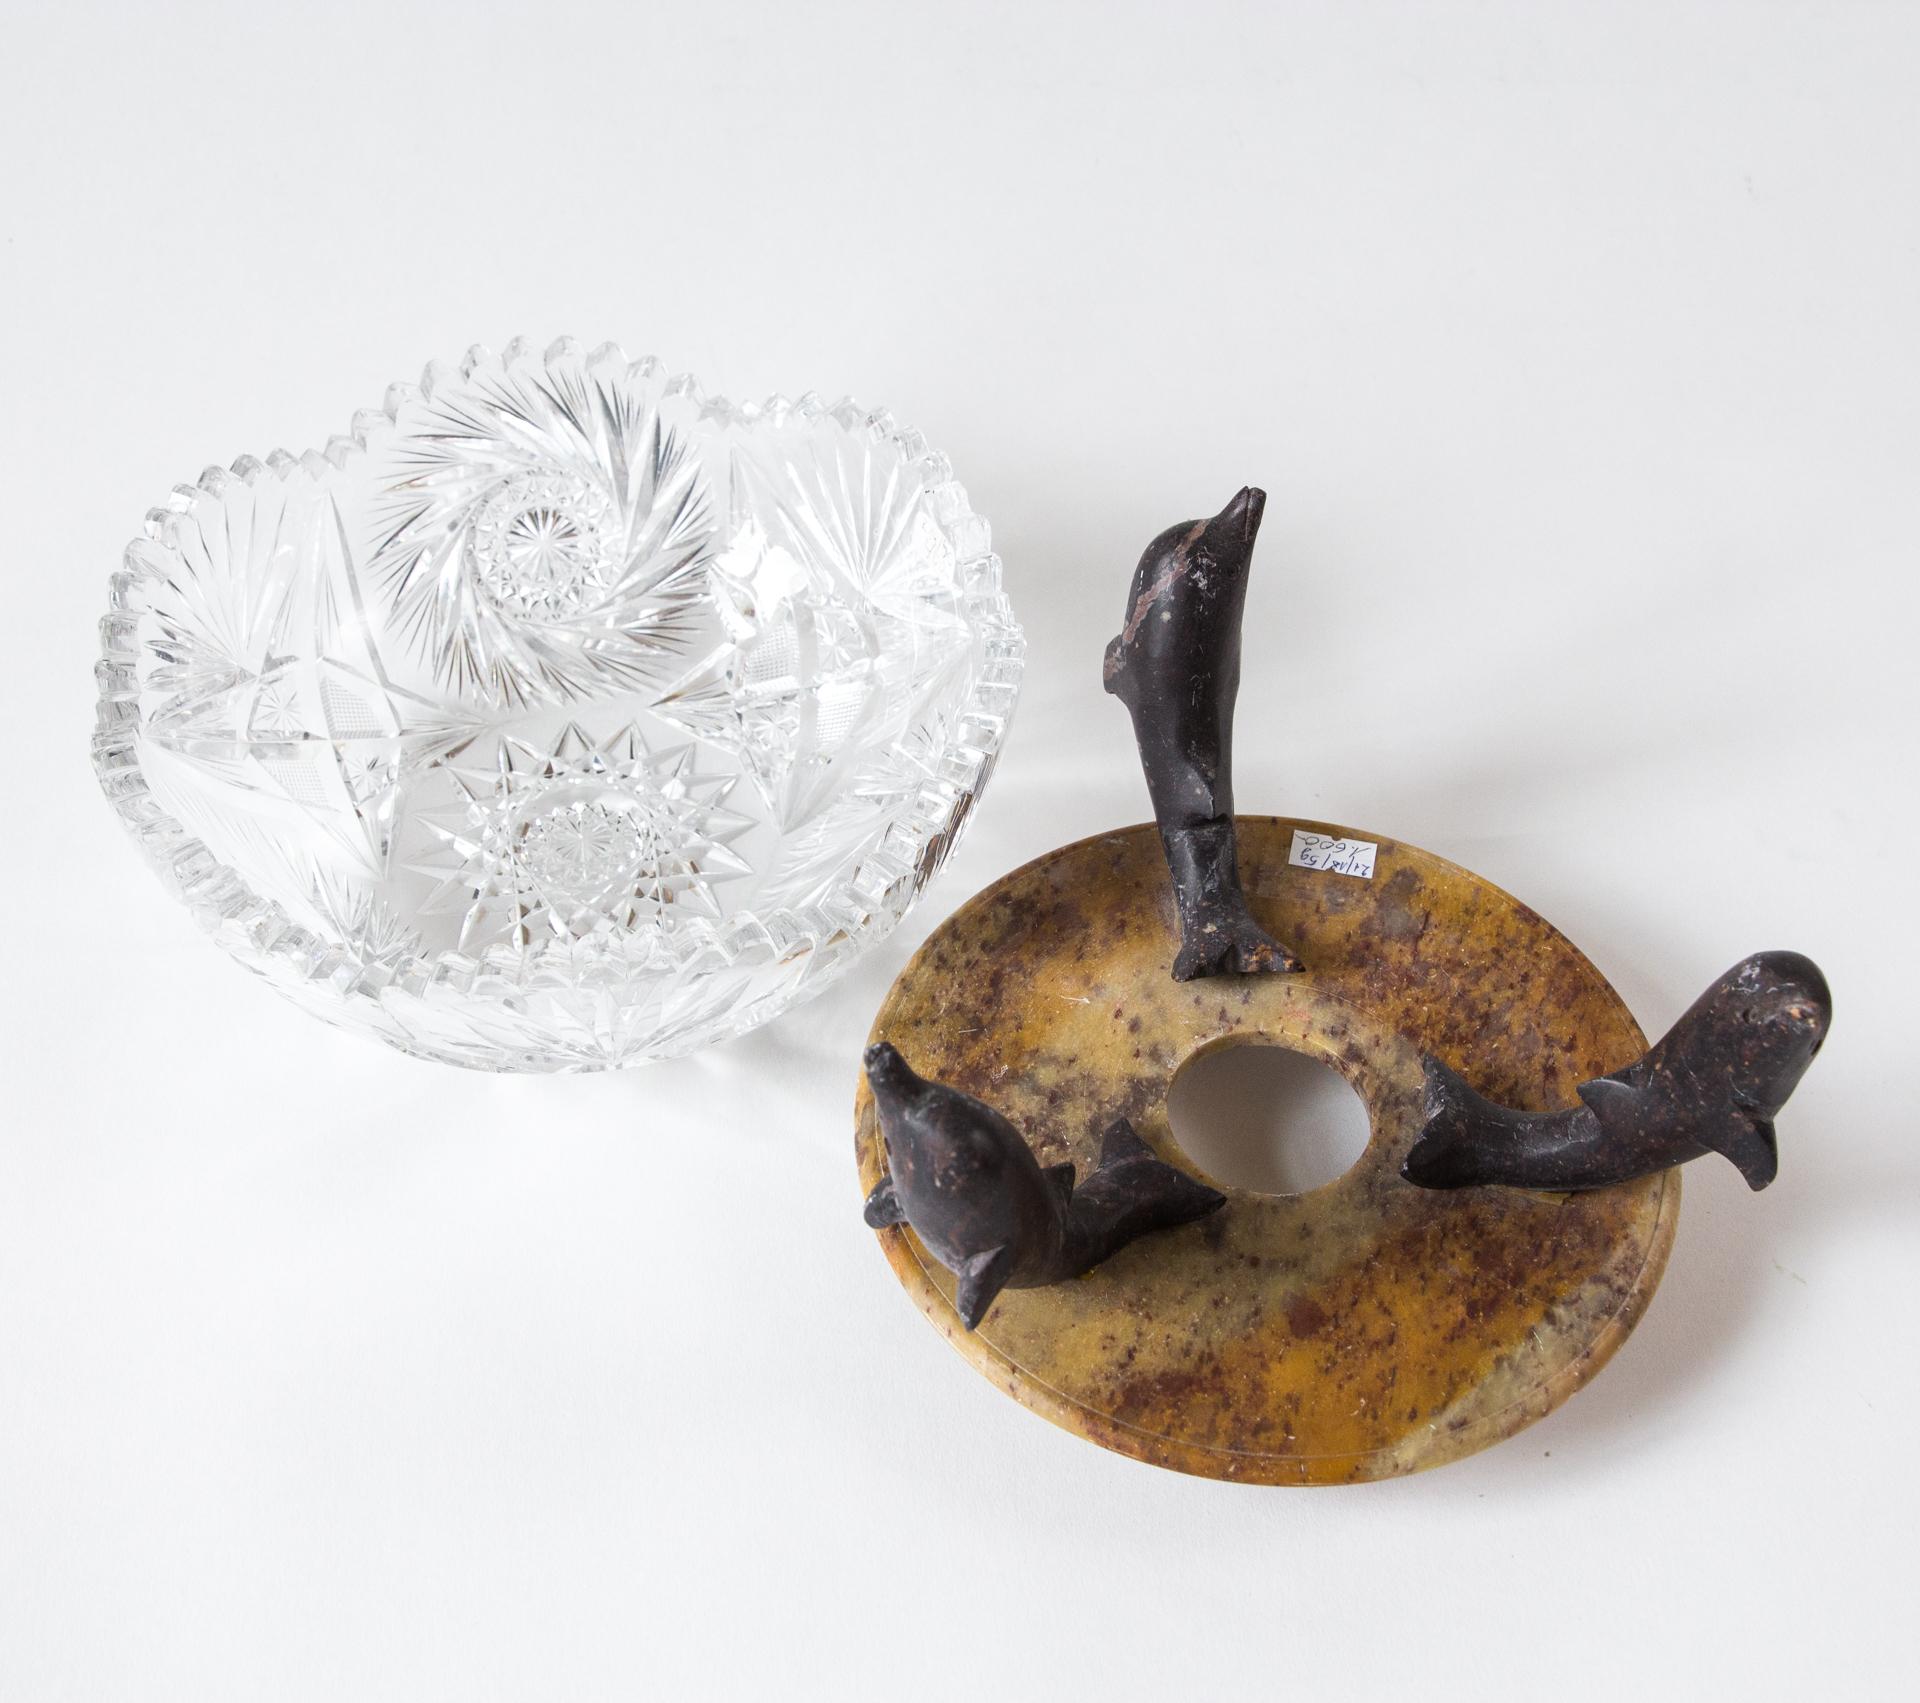 European Art Deco Plateau With Dolphins, Crystal Glass, Stone, 1930s For Sale